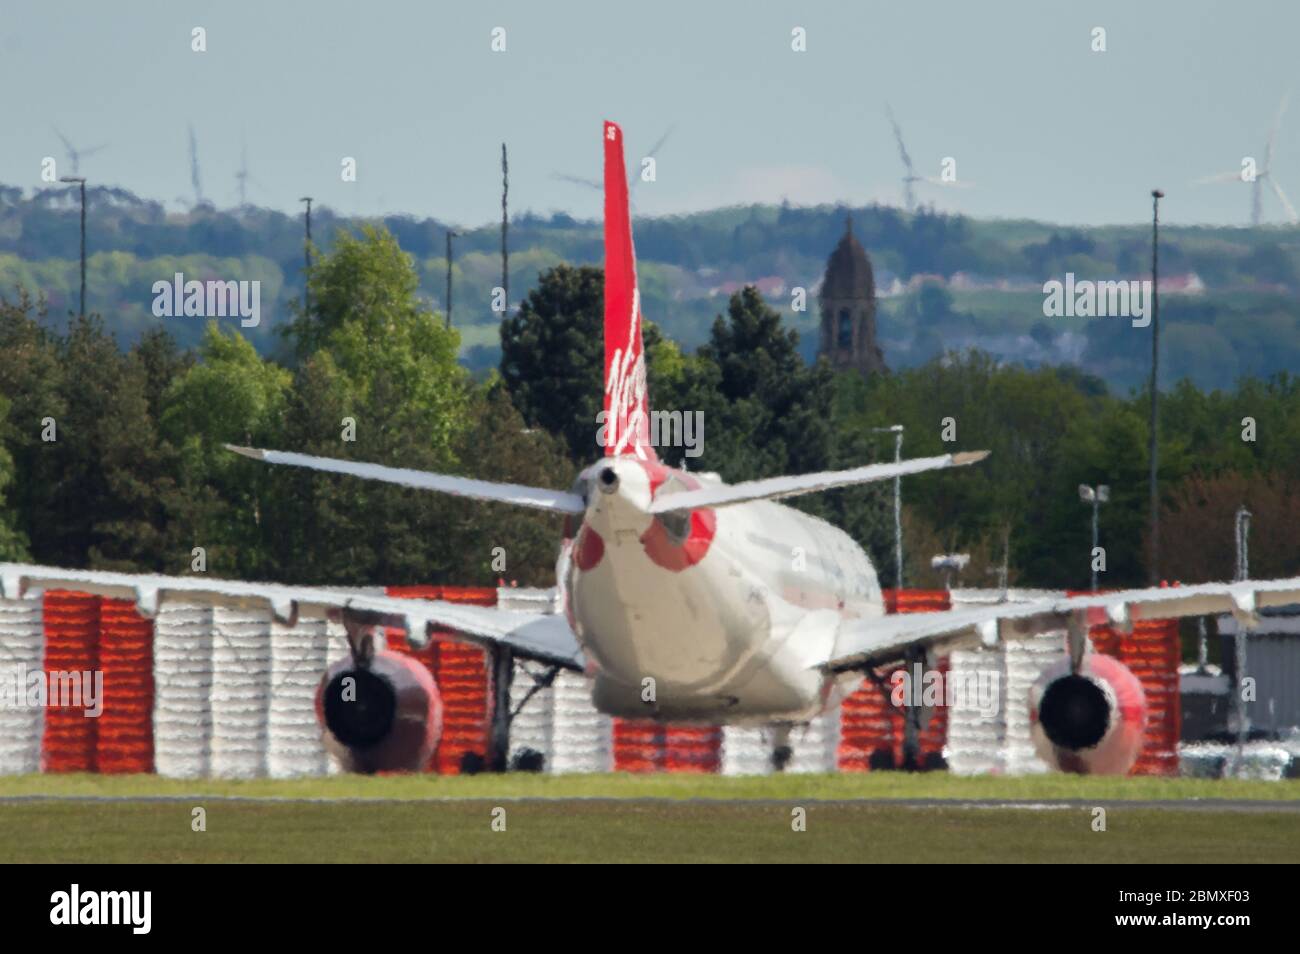 Glasgow, UK. 11th May, 2020. Pictured: Virgin Atlantic move more of their aircraft to Glasgow Airport for storage during the Coronavirus (COVID19) extended lockdown. Seen on the Tarmac are two Boeing 747-400 and two Airbus A330-300 Aircraft. So far Virgin Atlantic announced they will close down their operations at Gatwick Airport indefinitely, which will have massive knock on effect for other airlines and the south of England. Credit: Colin Fisher/Alamy Live News Stock Photo